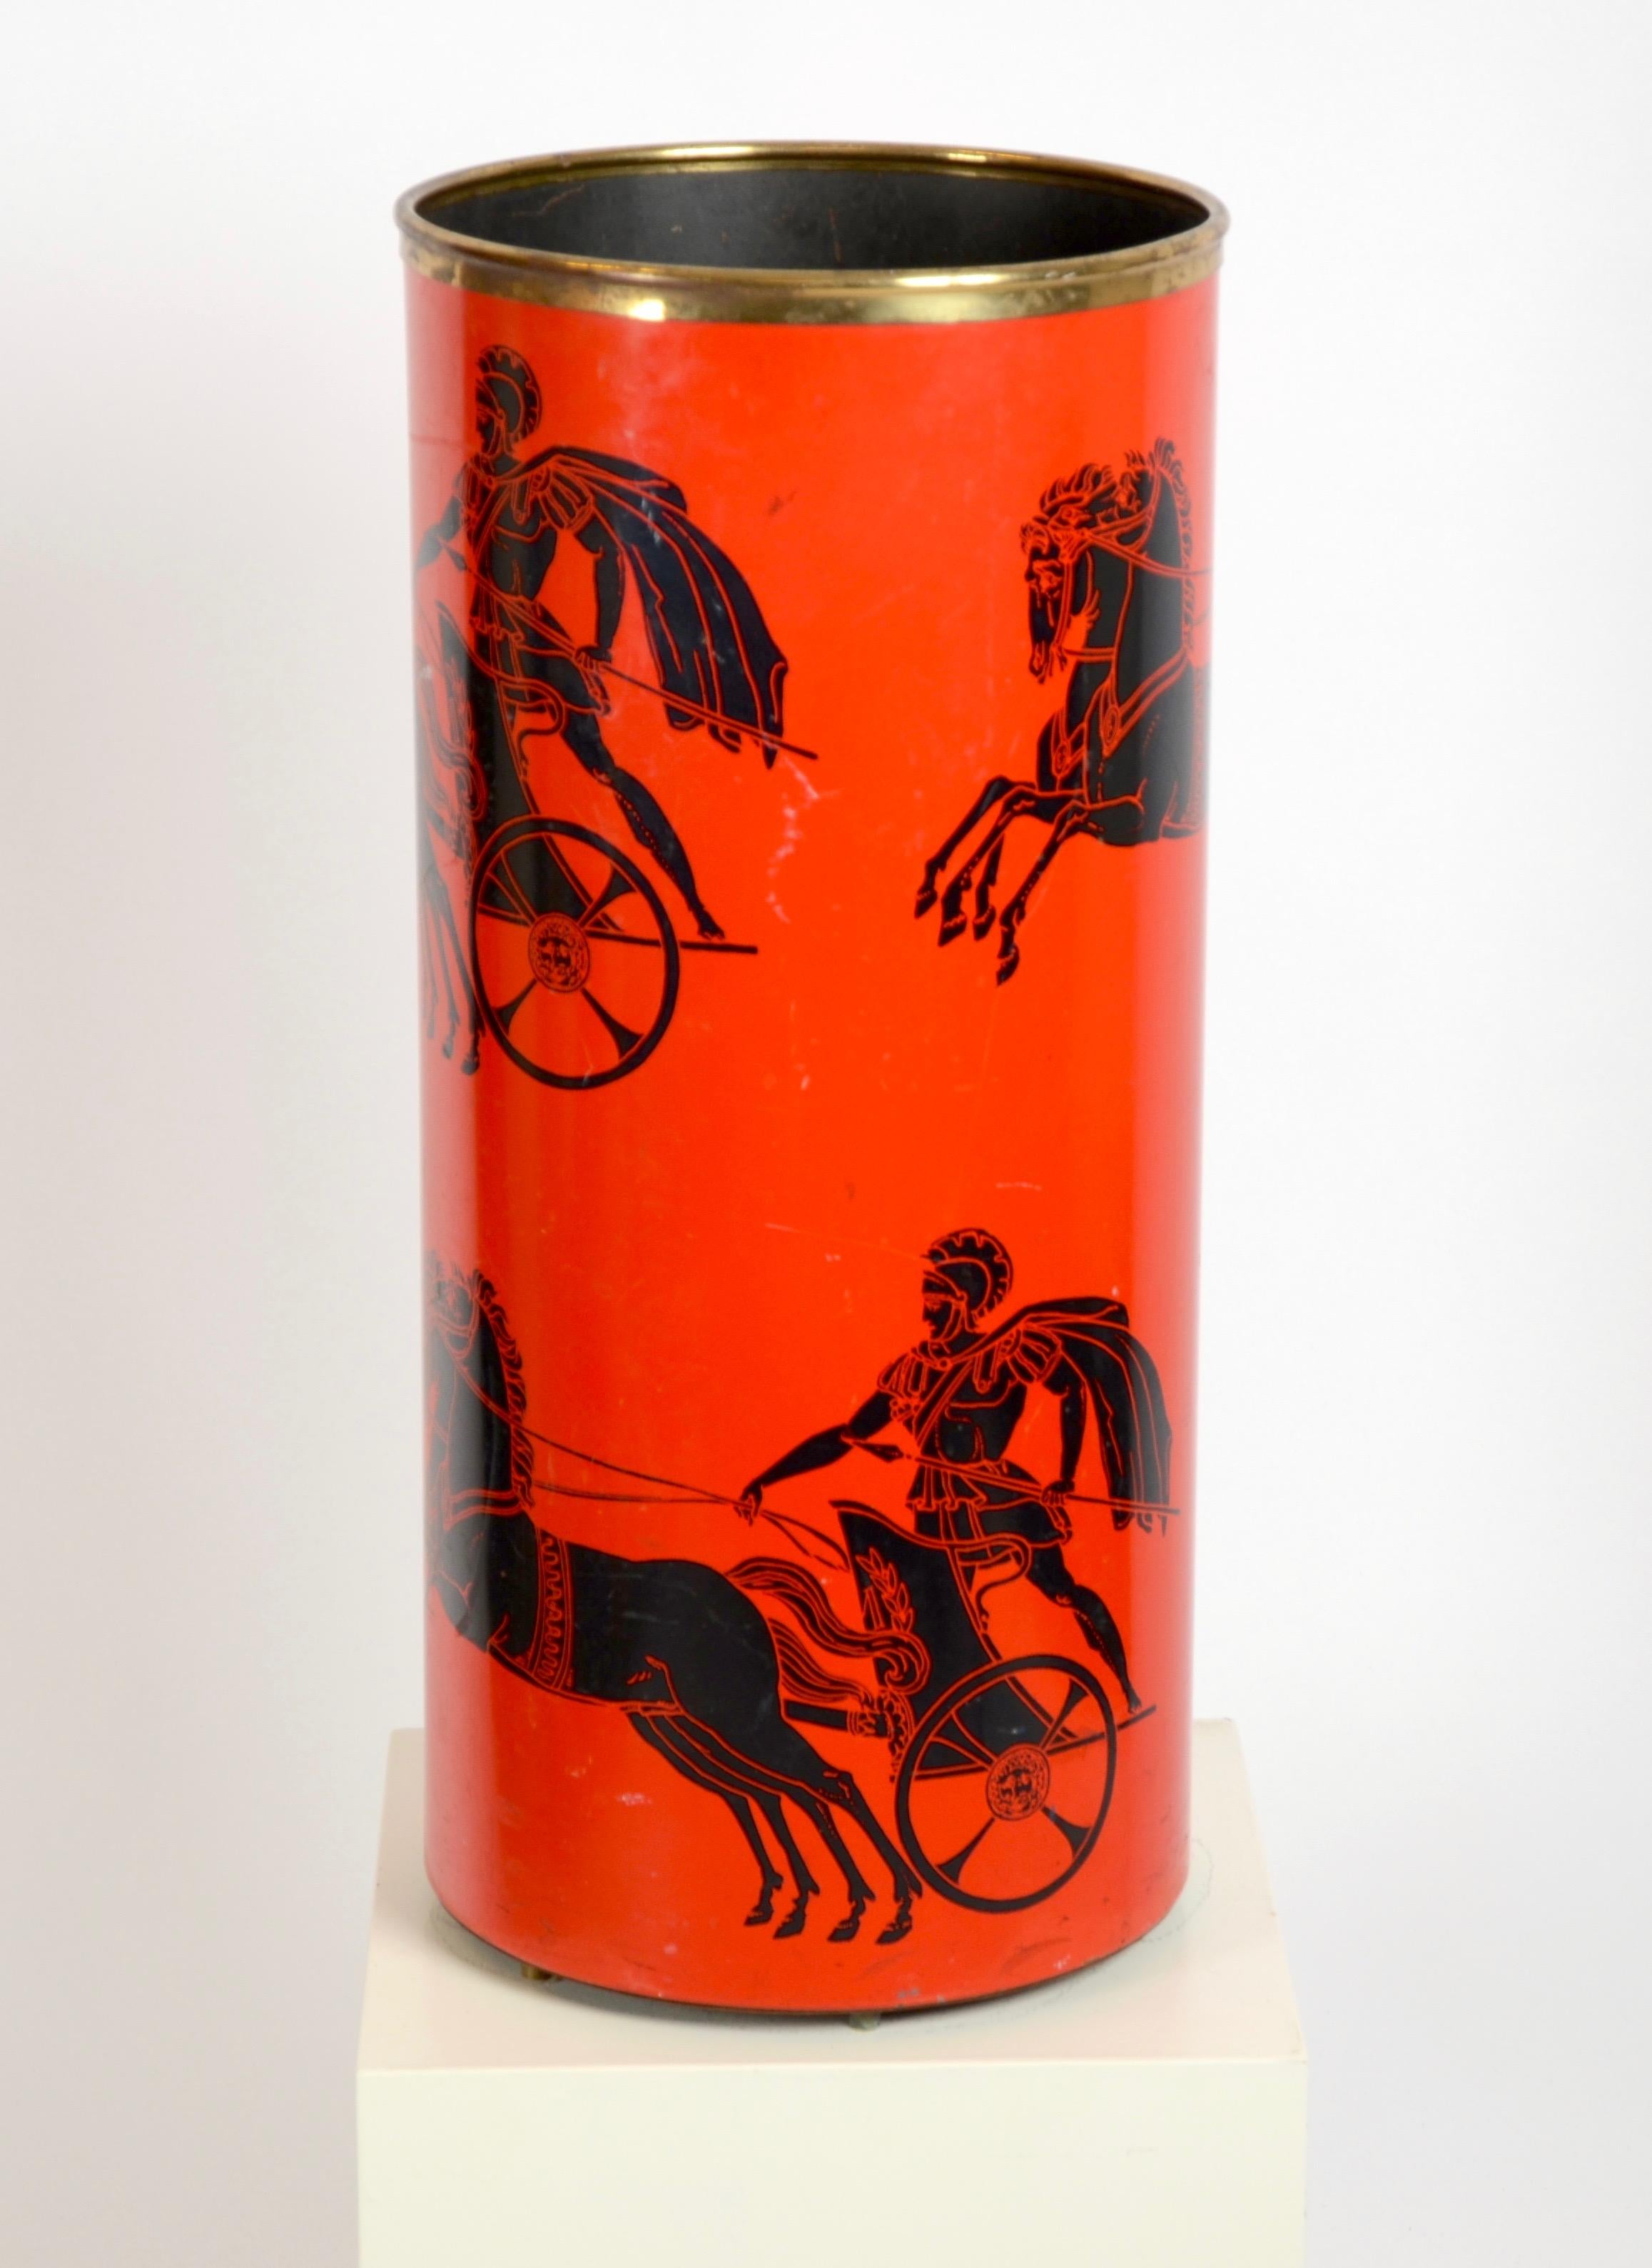 Piero Fornasetti umbrella stand “Bighe”. Lithographically printed metal and brass. Italy, circa 1960.

Marked: FORNASETTI MILANO, MADE IN ITALY. Gold label: MADE EXPRESSLY FOR OHLSSONS MALMÖ.